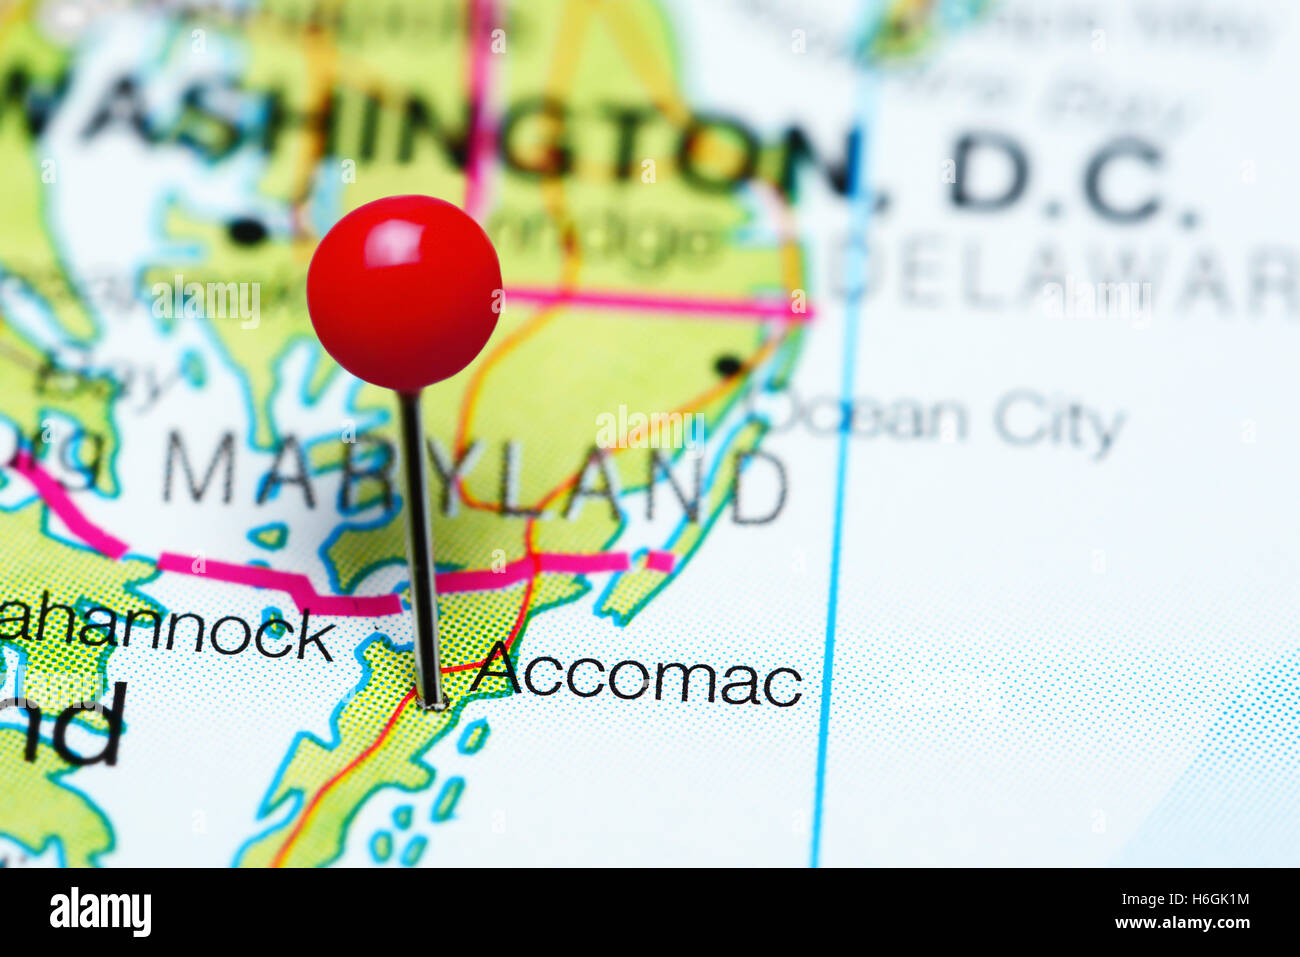 Accomac pinned on a map of Virginia, USA Stock Photo